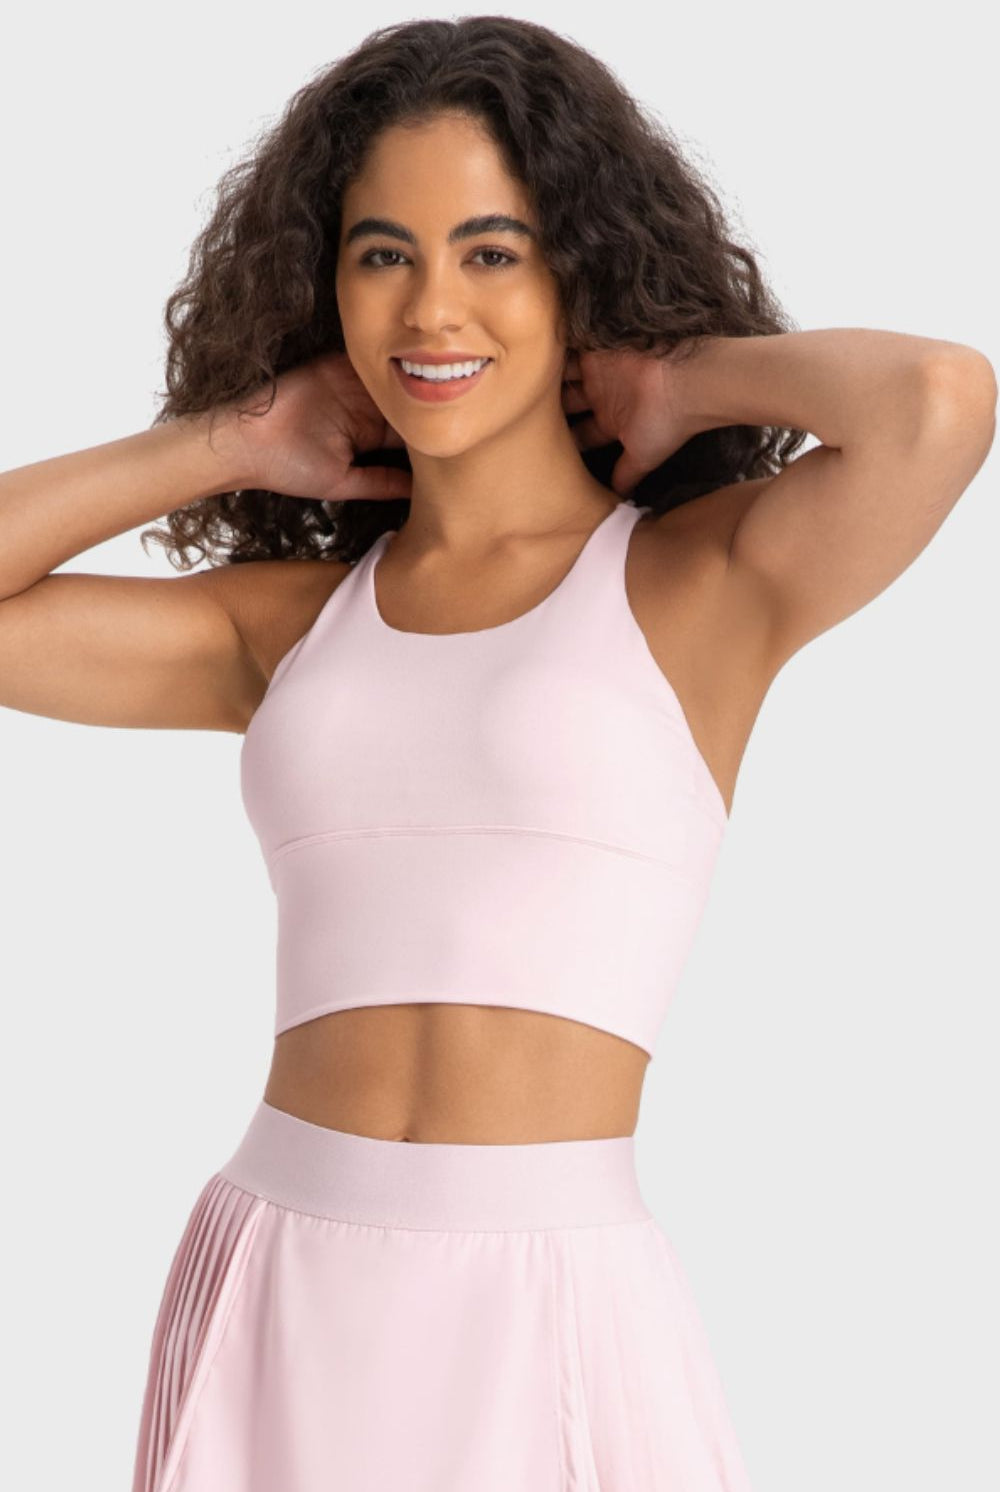 Antique White Sugar and Spice Crisscross Back Ladder Detail Sports Bra activewear